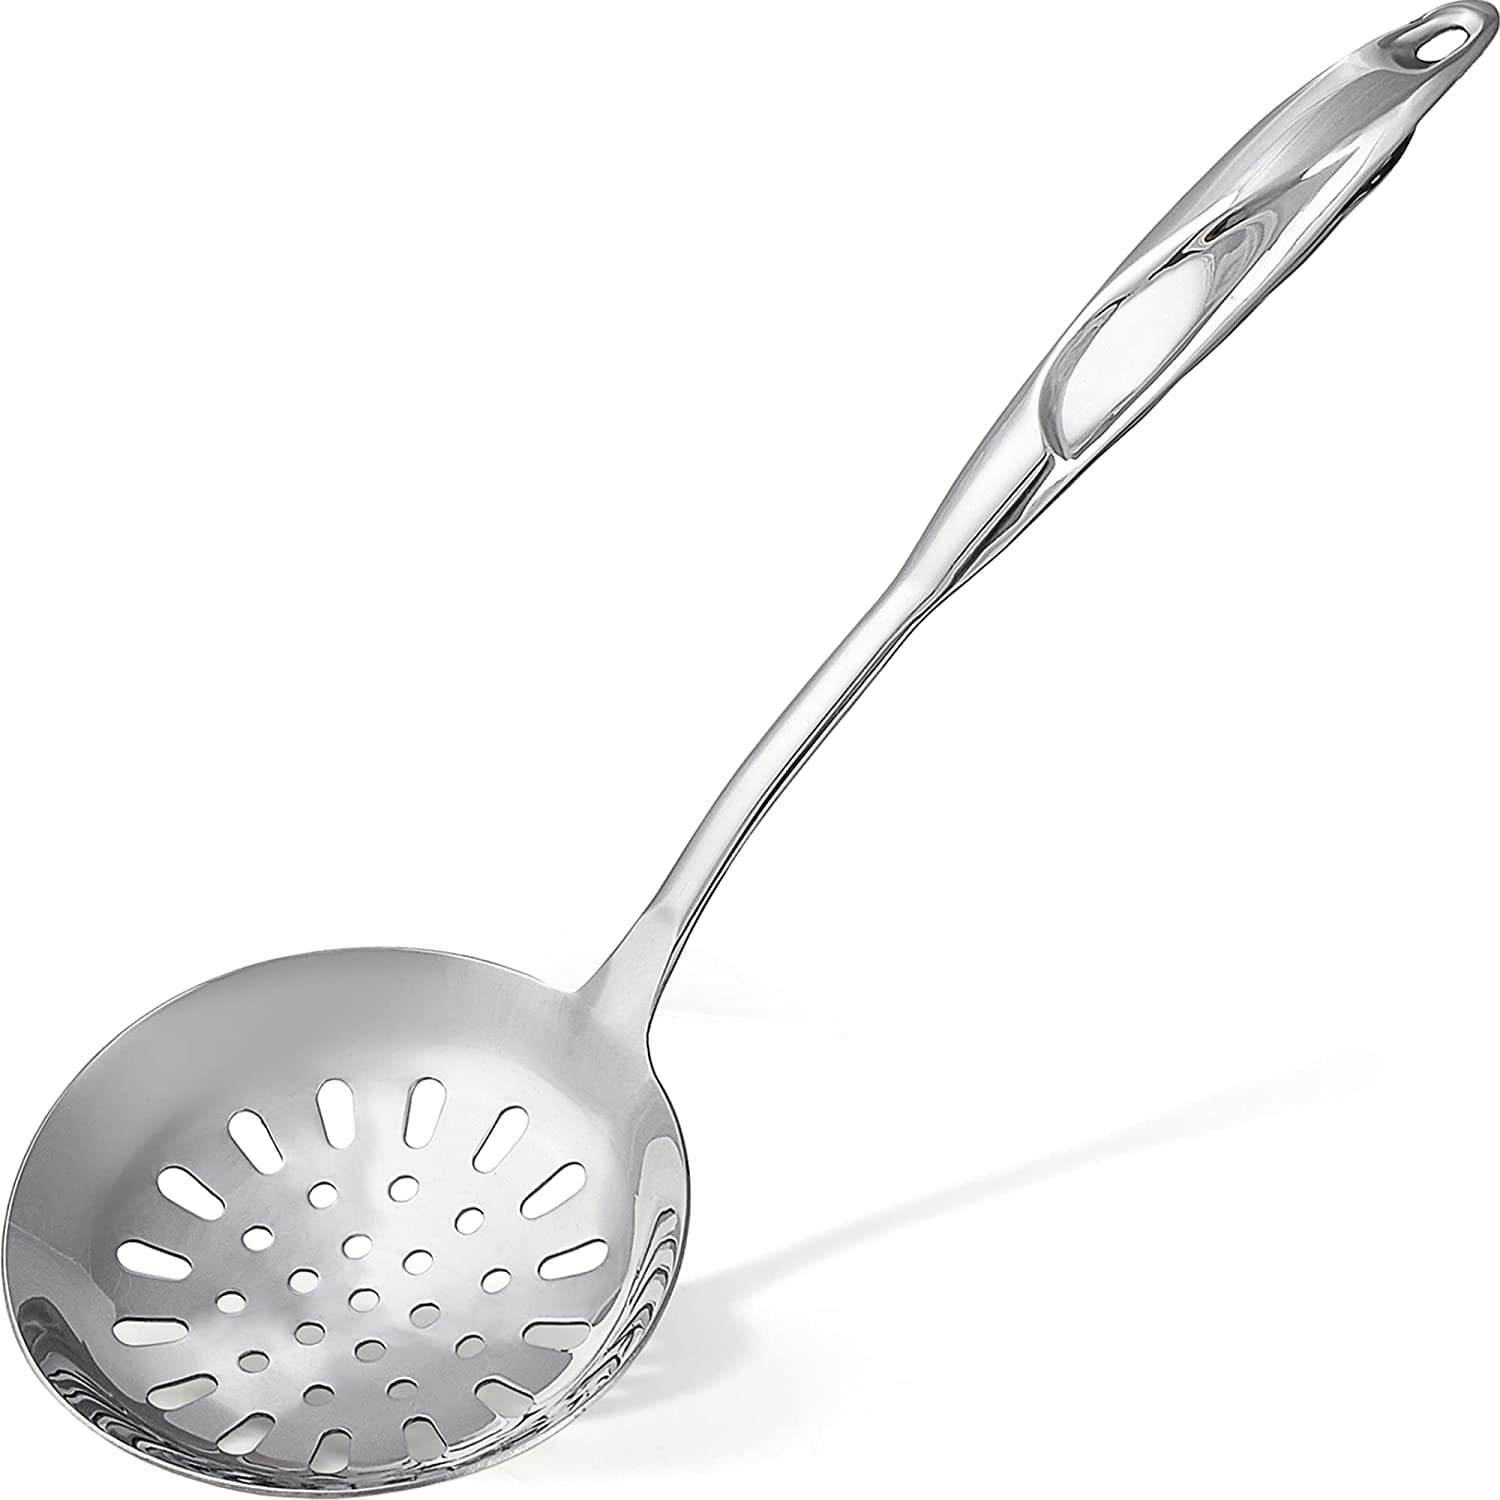 Stainless Steel Slotted Cooking Spoon, Large Metal Chef Strainer Utensil  For Cooking, Serving, And Mixing, The #1 Dishwasher Safe Kitchen Tool, 15